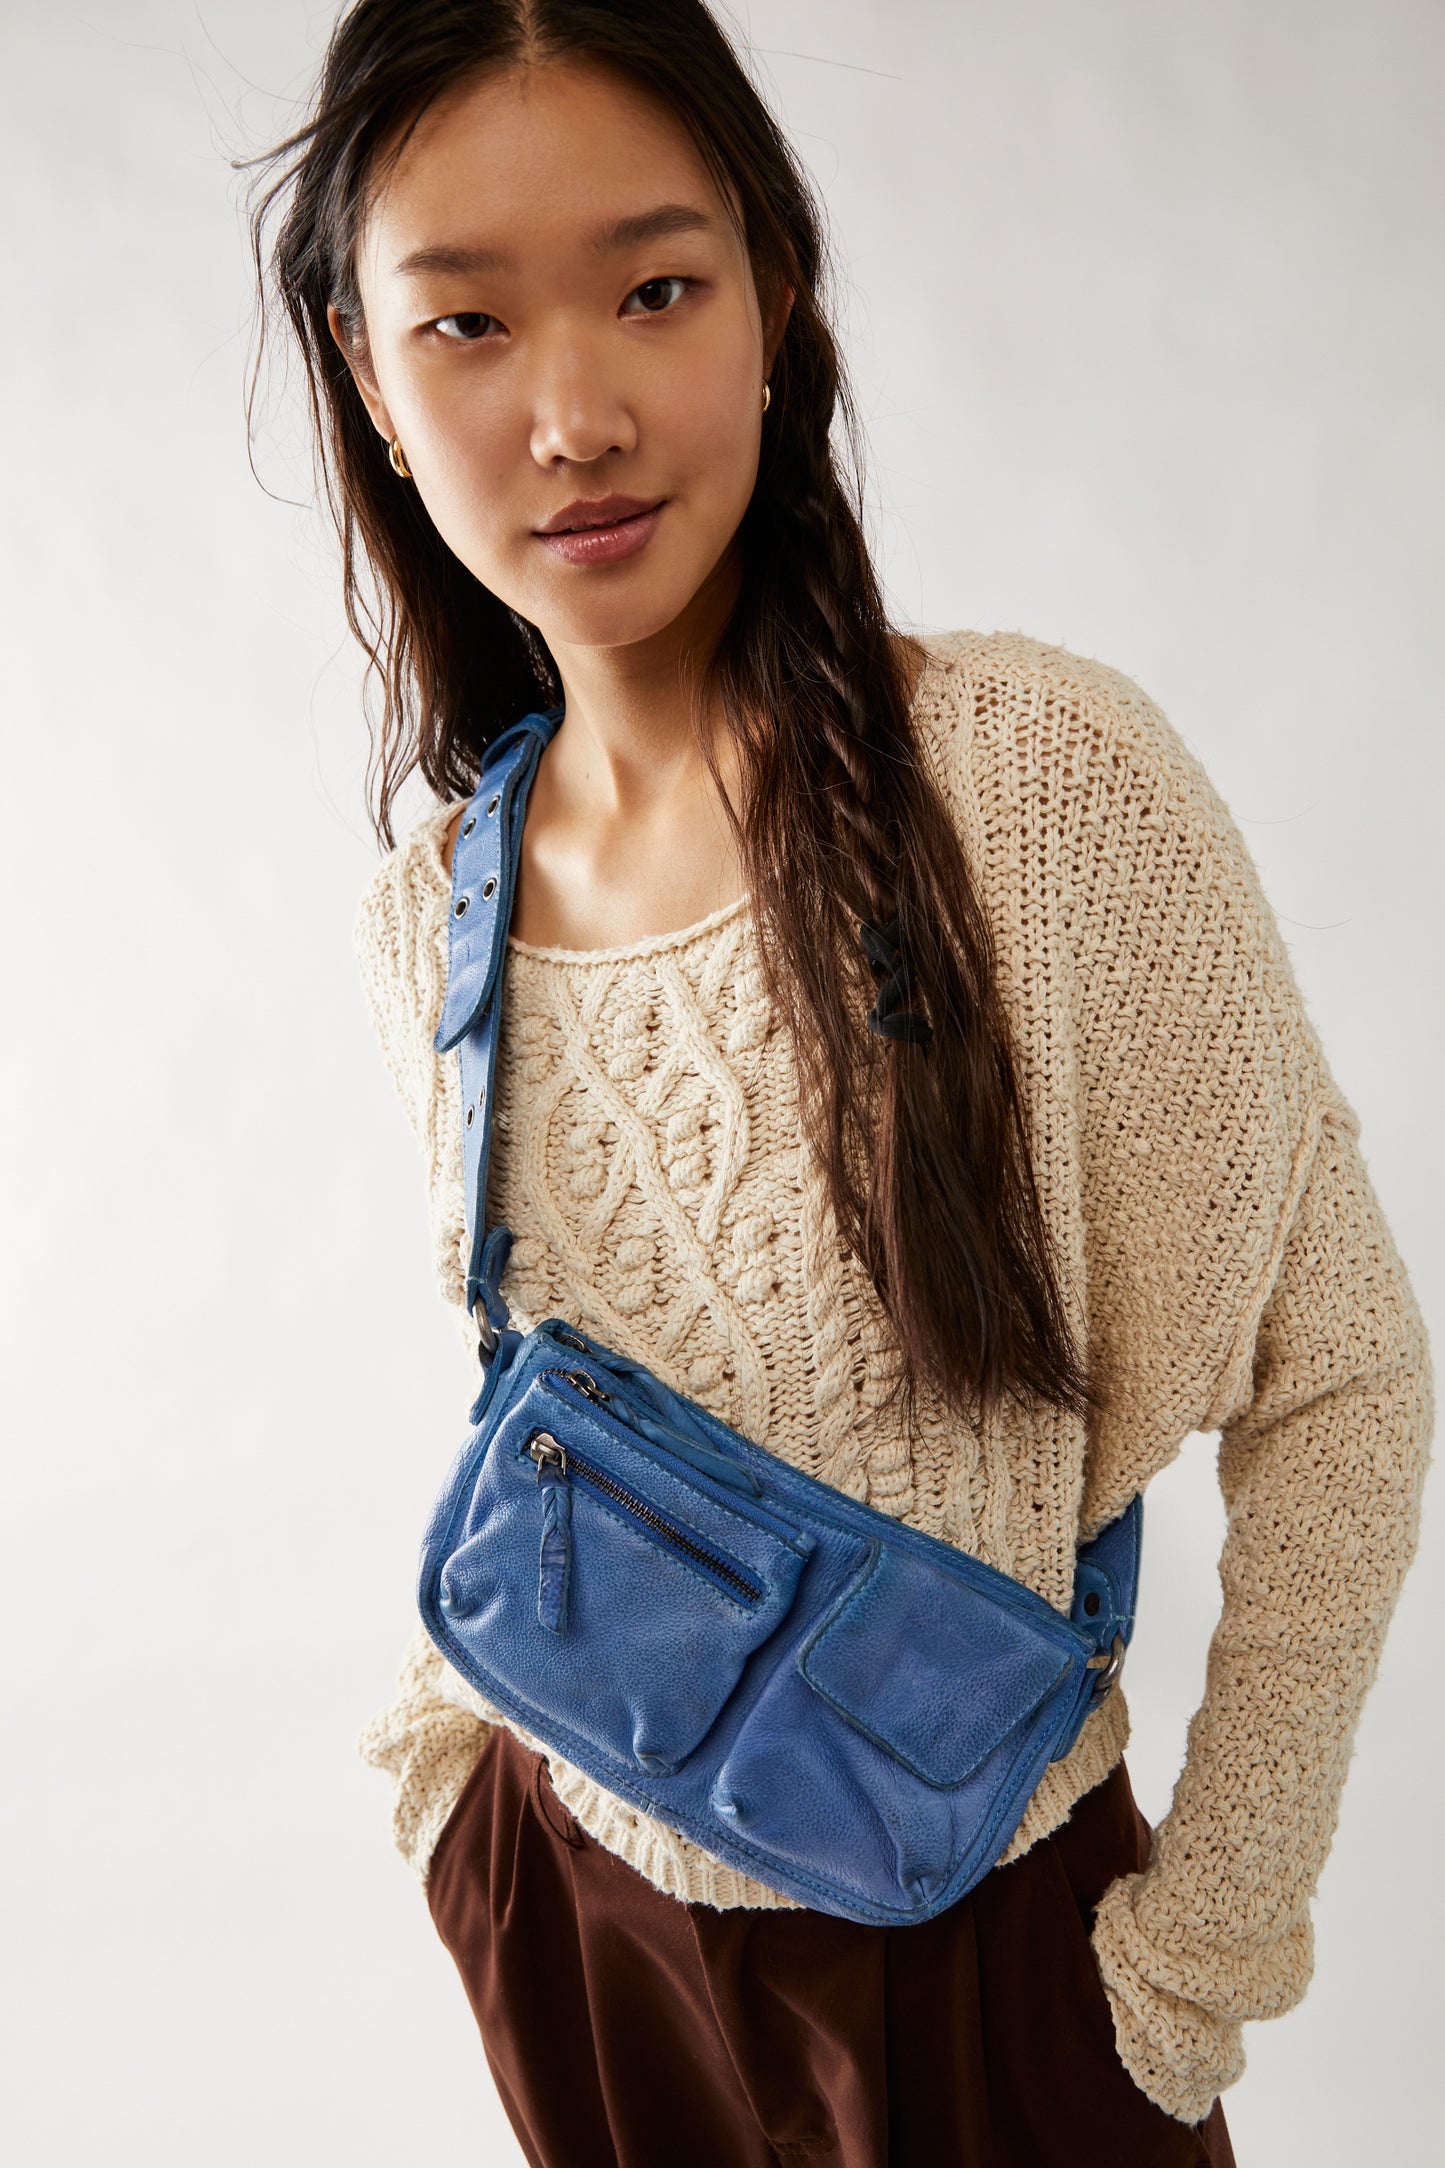 Free People: Wade Leather Sling - Iridescent Blue